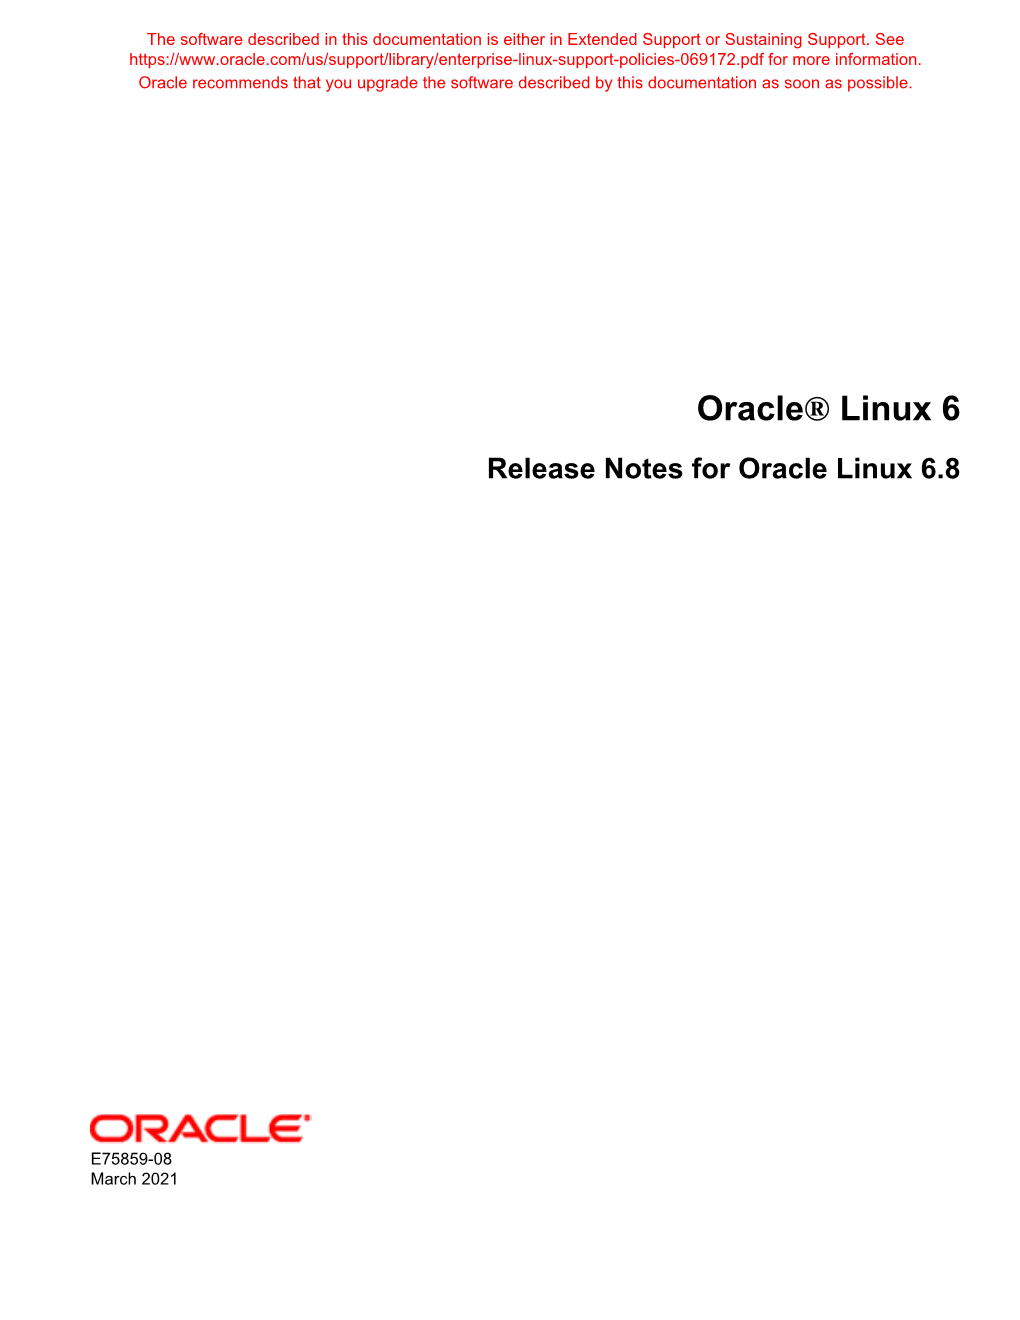 Oracle® Linux 6 Release Notes for Oracle Linux 6.8